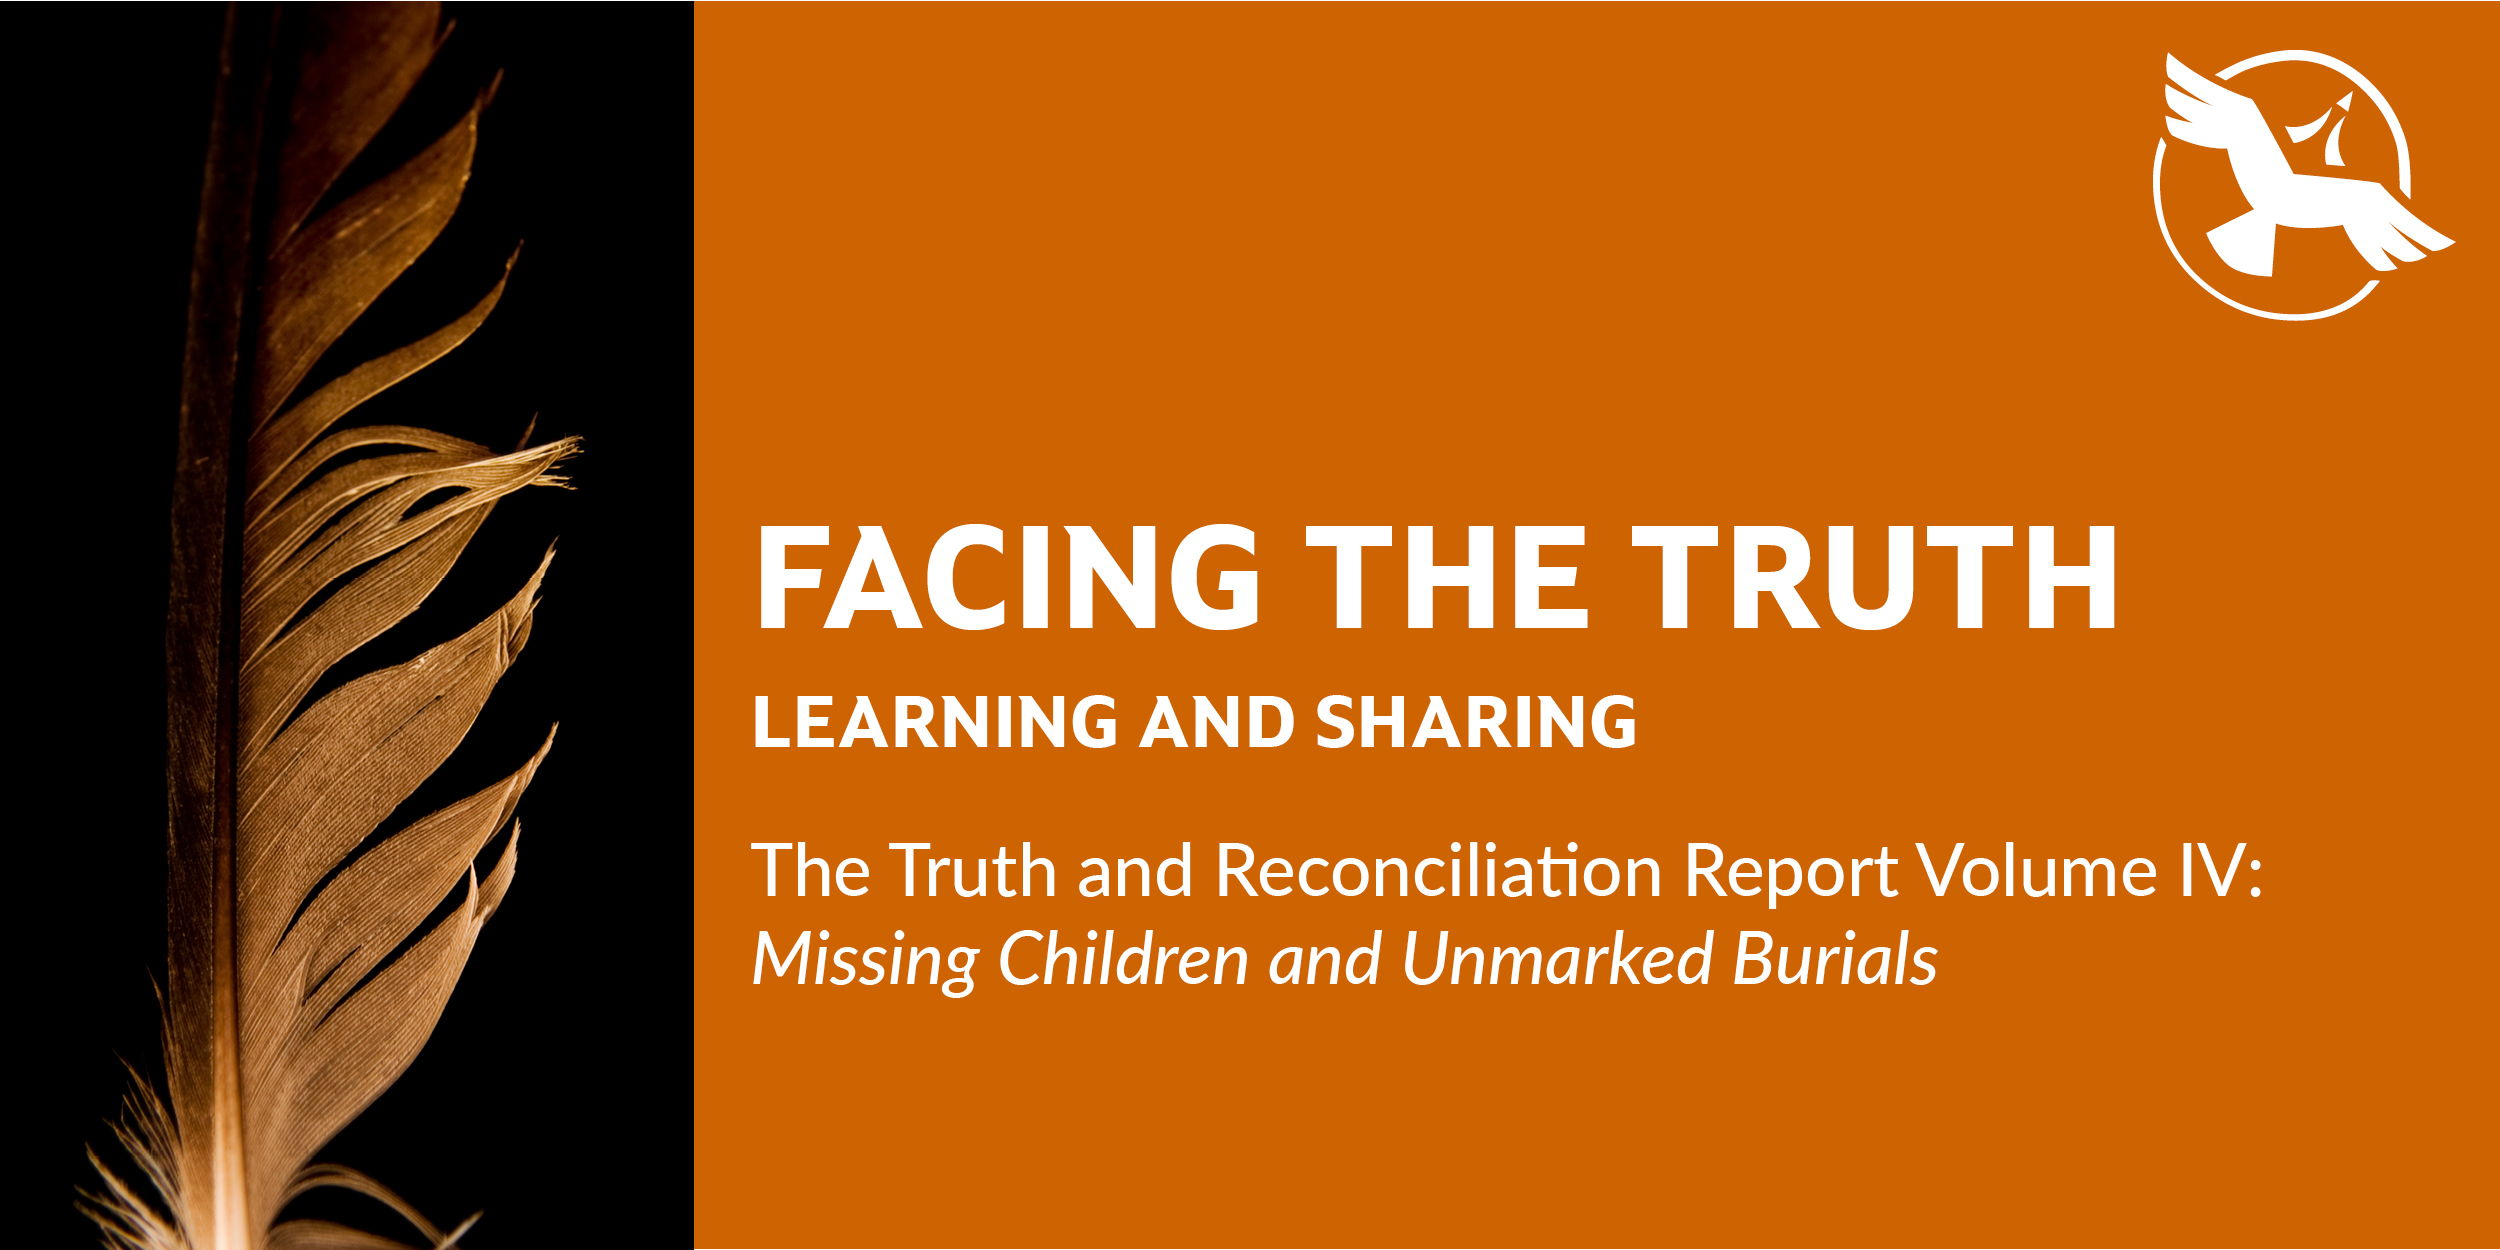 Facing the Truth: Learning and Sharing